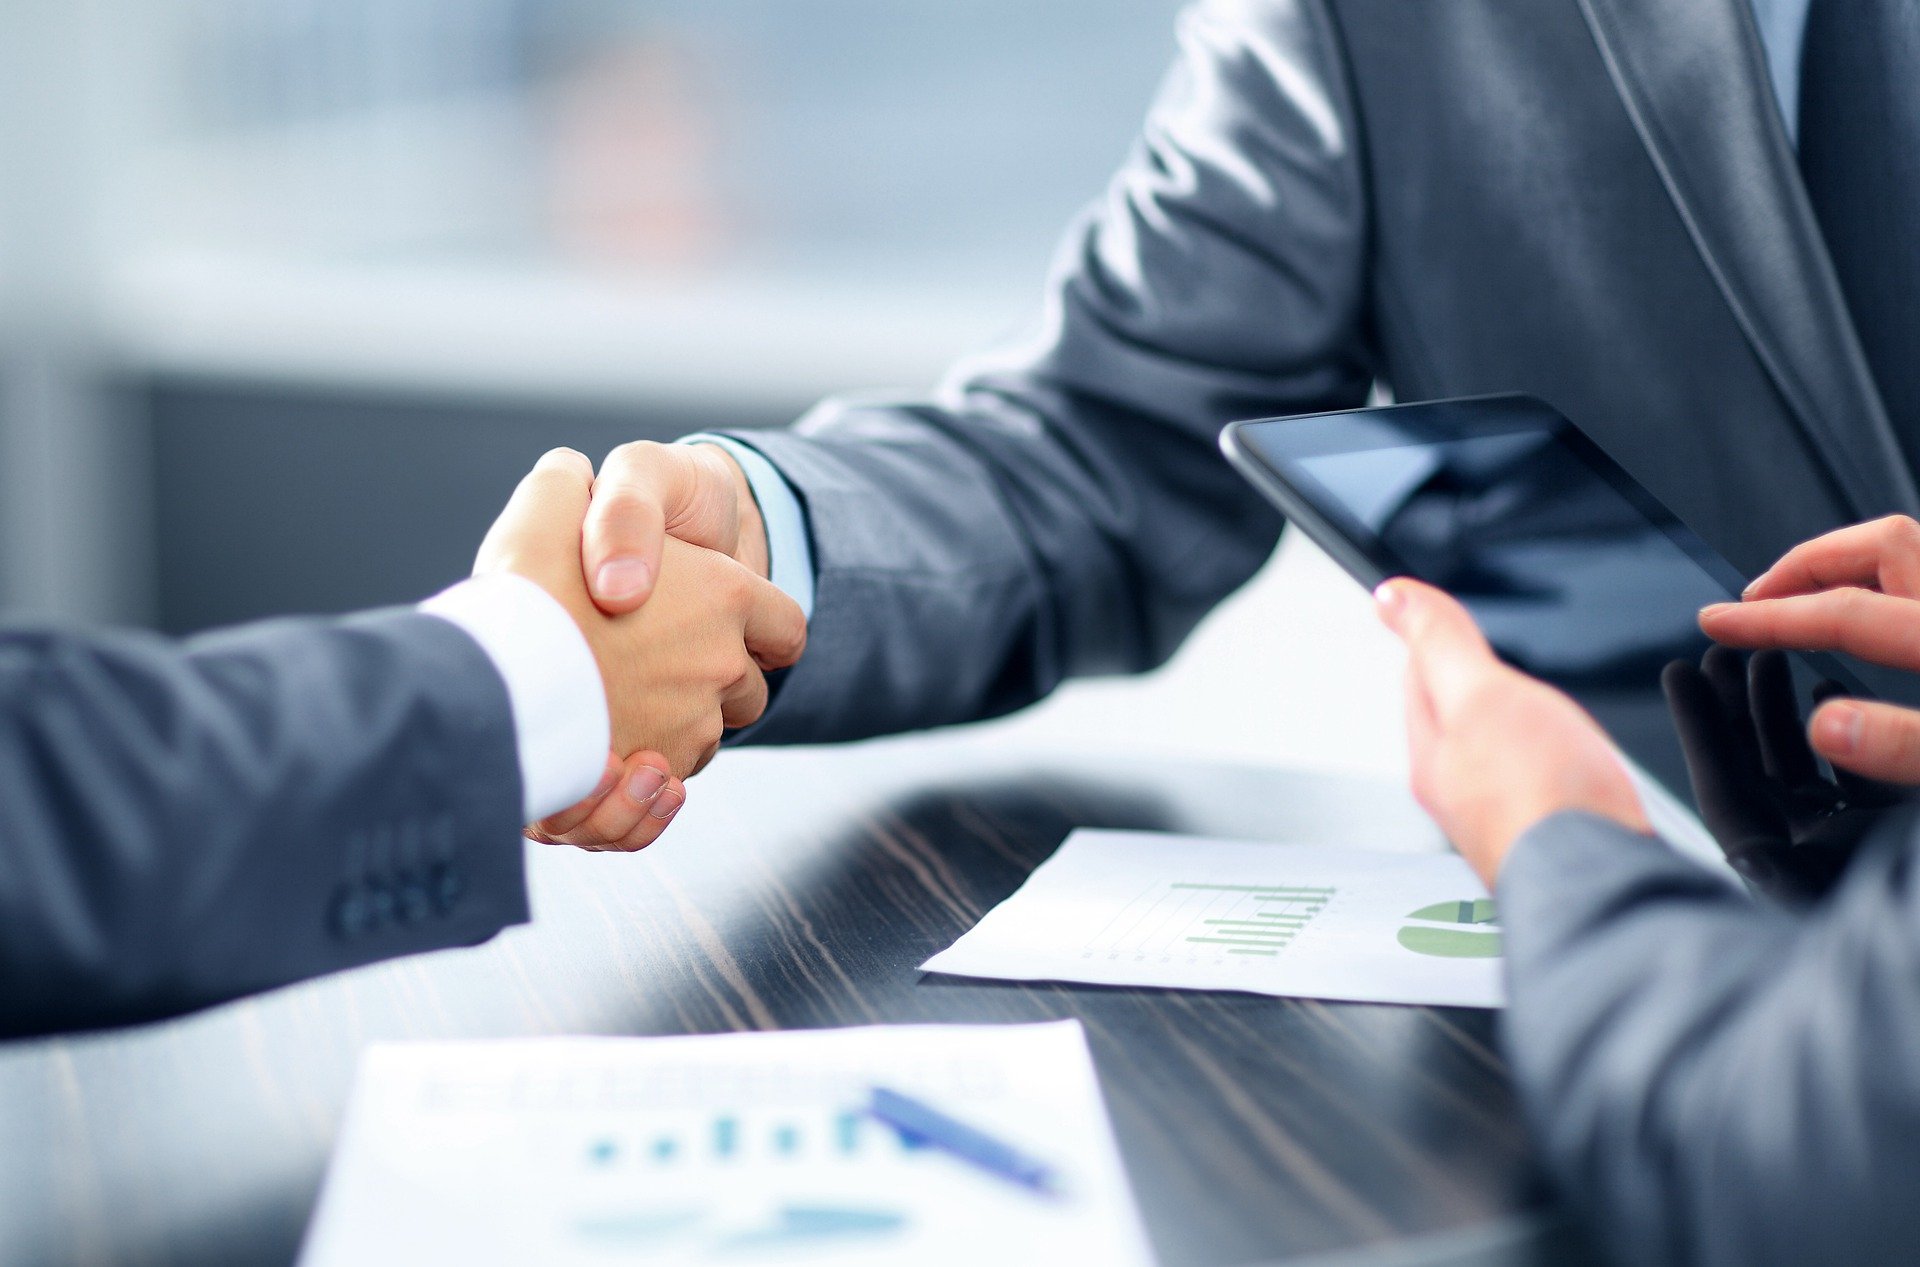 Two men in suits shaking hands after completing a deal. You only see their right arms and hands. There's a third man's hand on the right side of the image holding a phone.